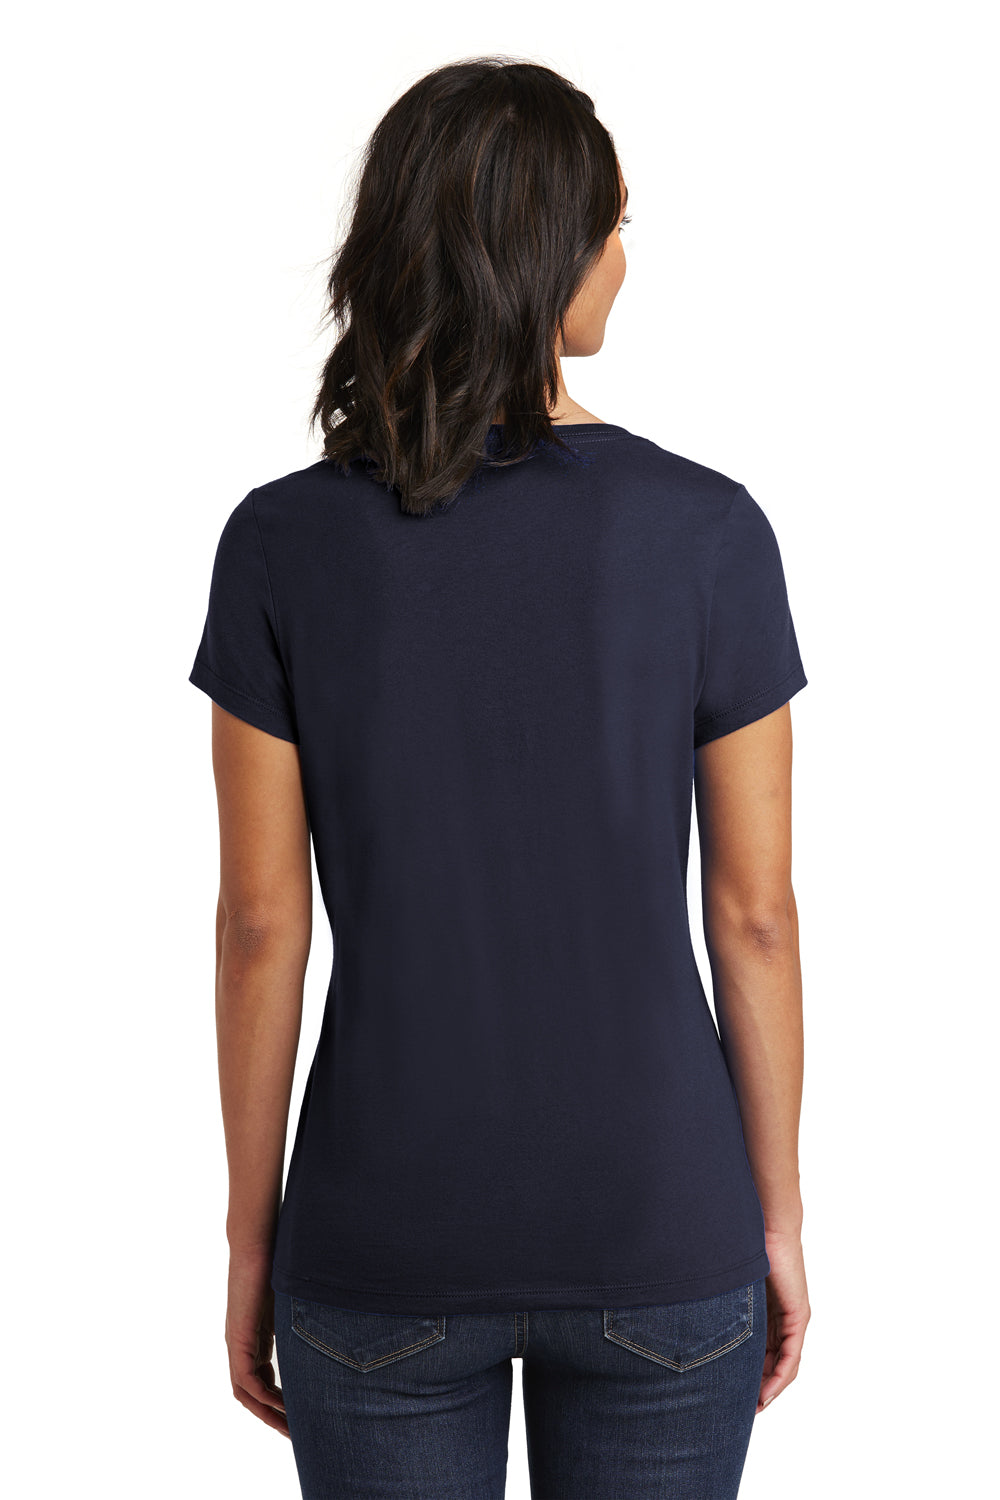 District DT6503 Womens Very Important Short Sleeve V-Neck T-Shirt Navy Blue Back